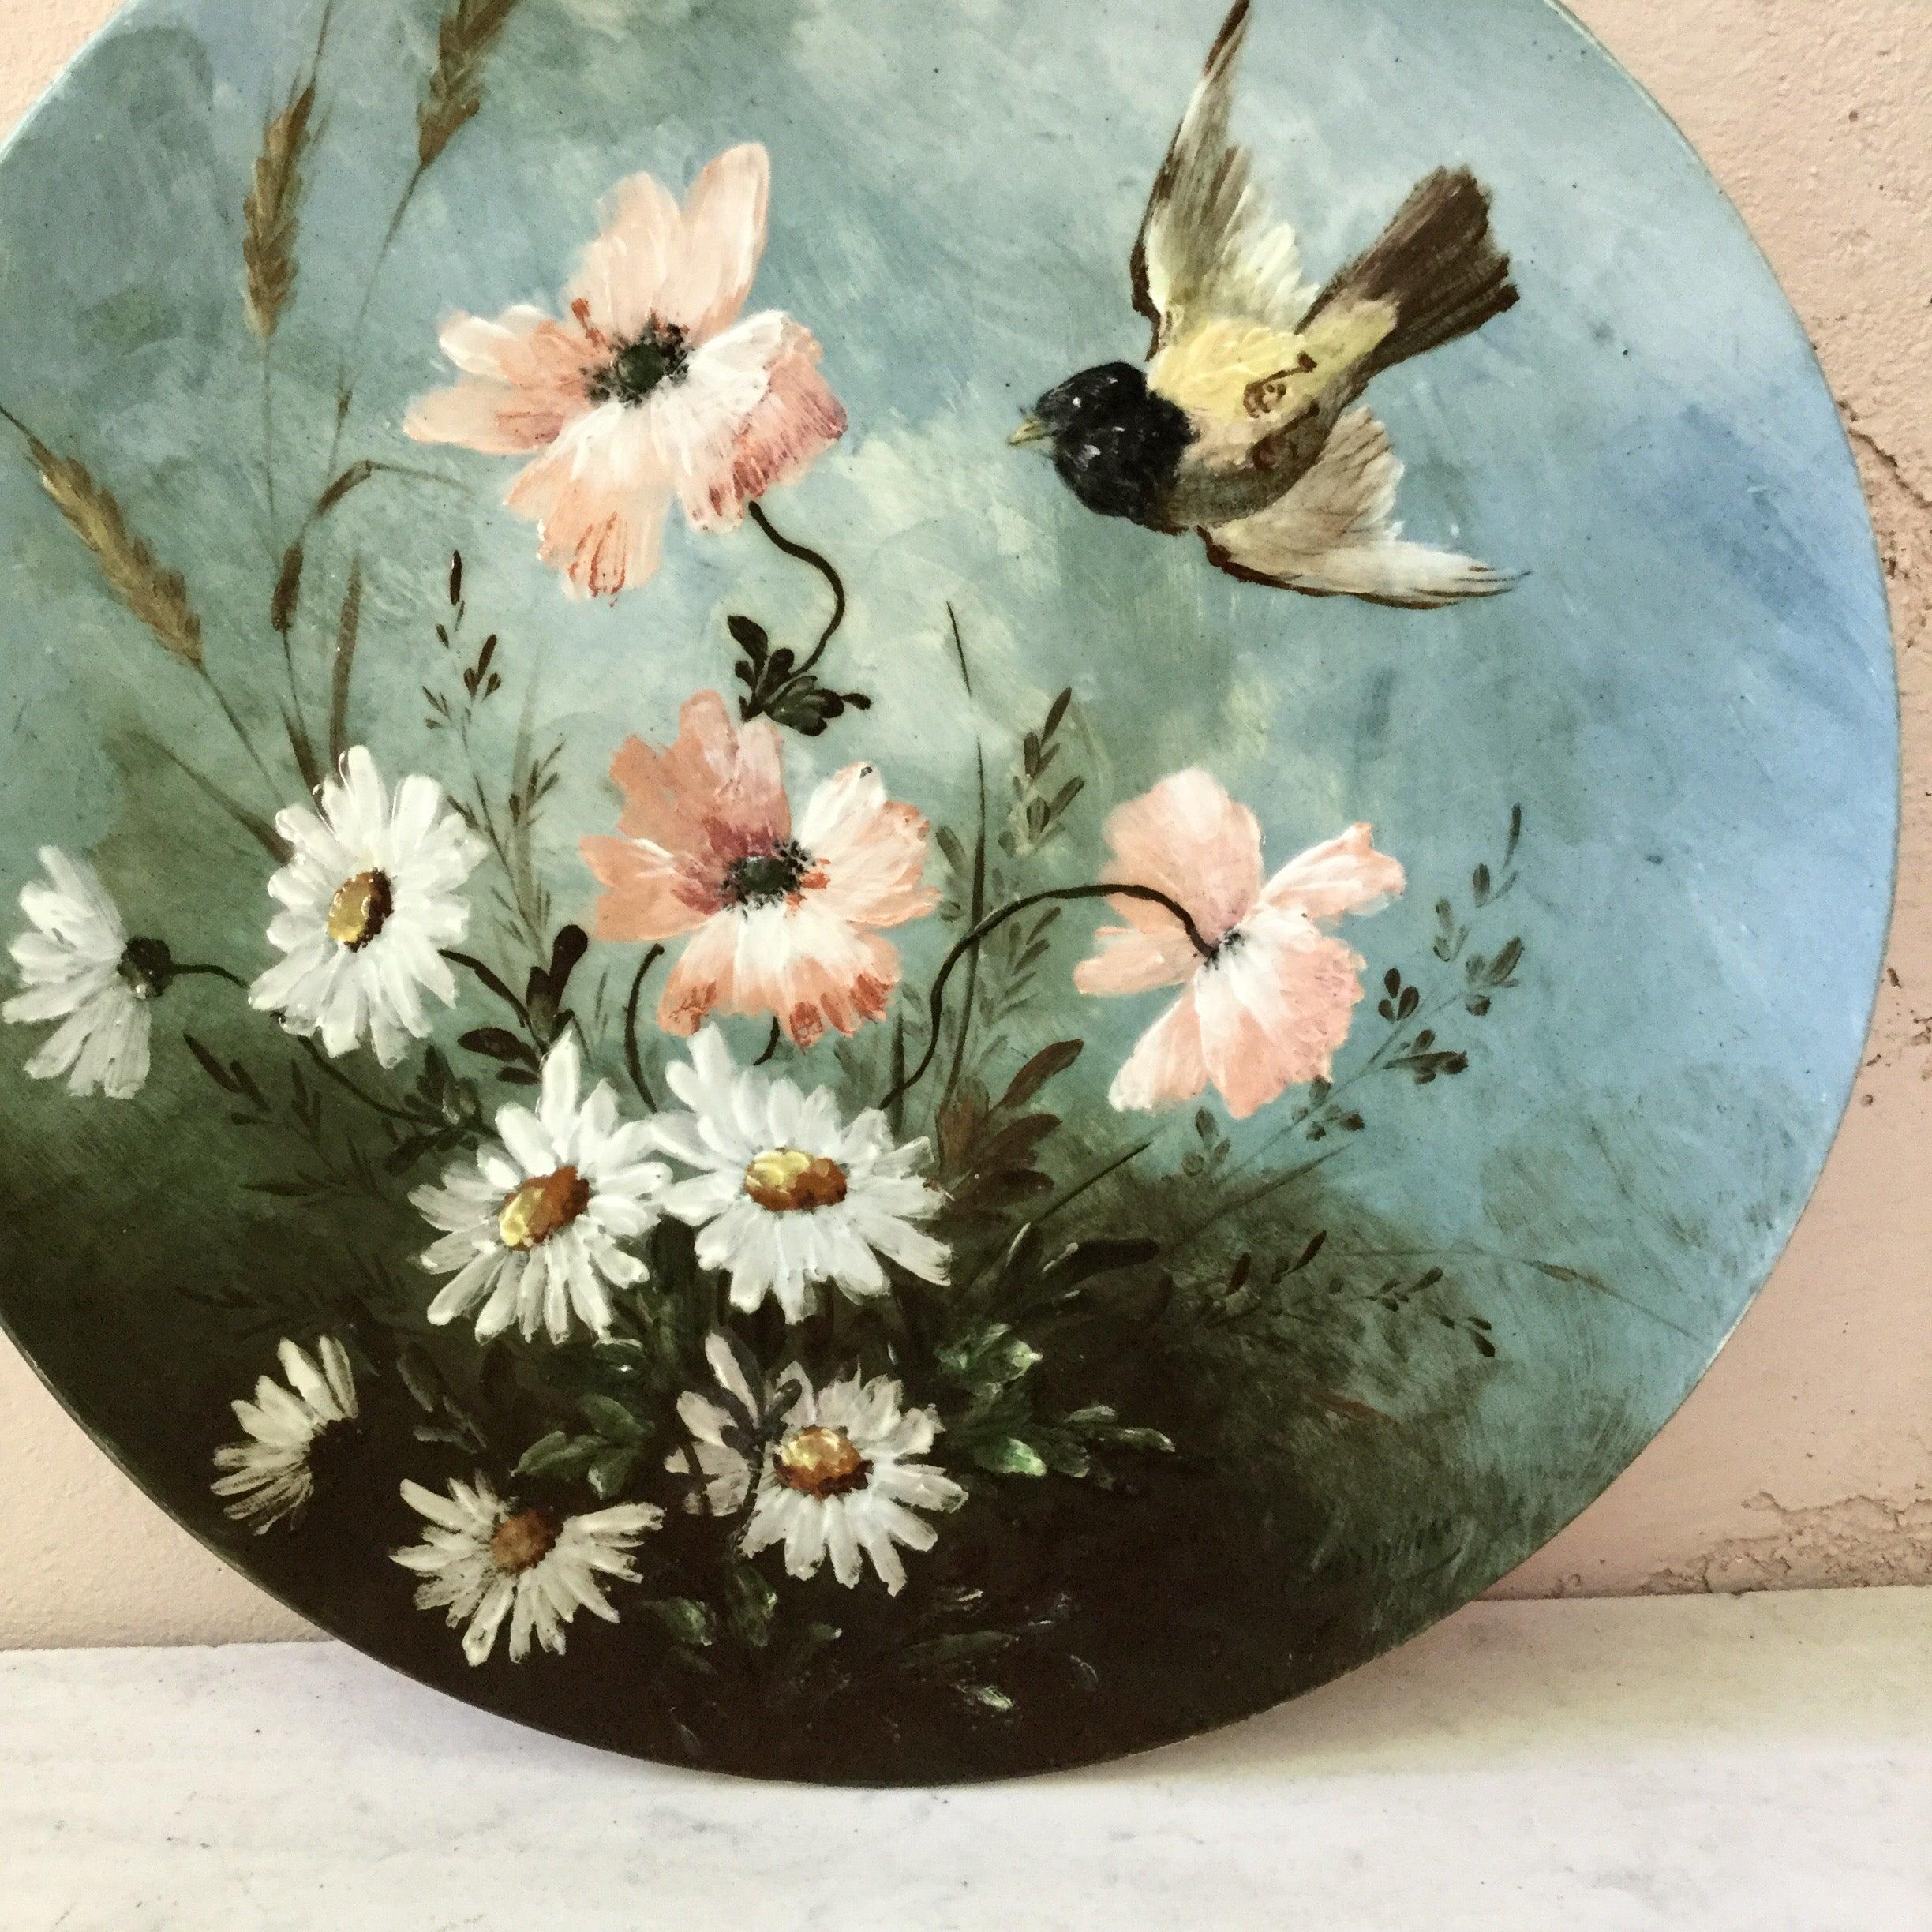 Charming 19th century French majolica painted platter bird and white daisy and poppies signed Longwy.
Impressionist period.